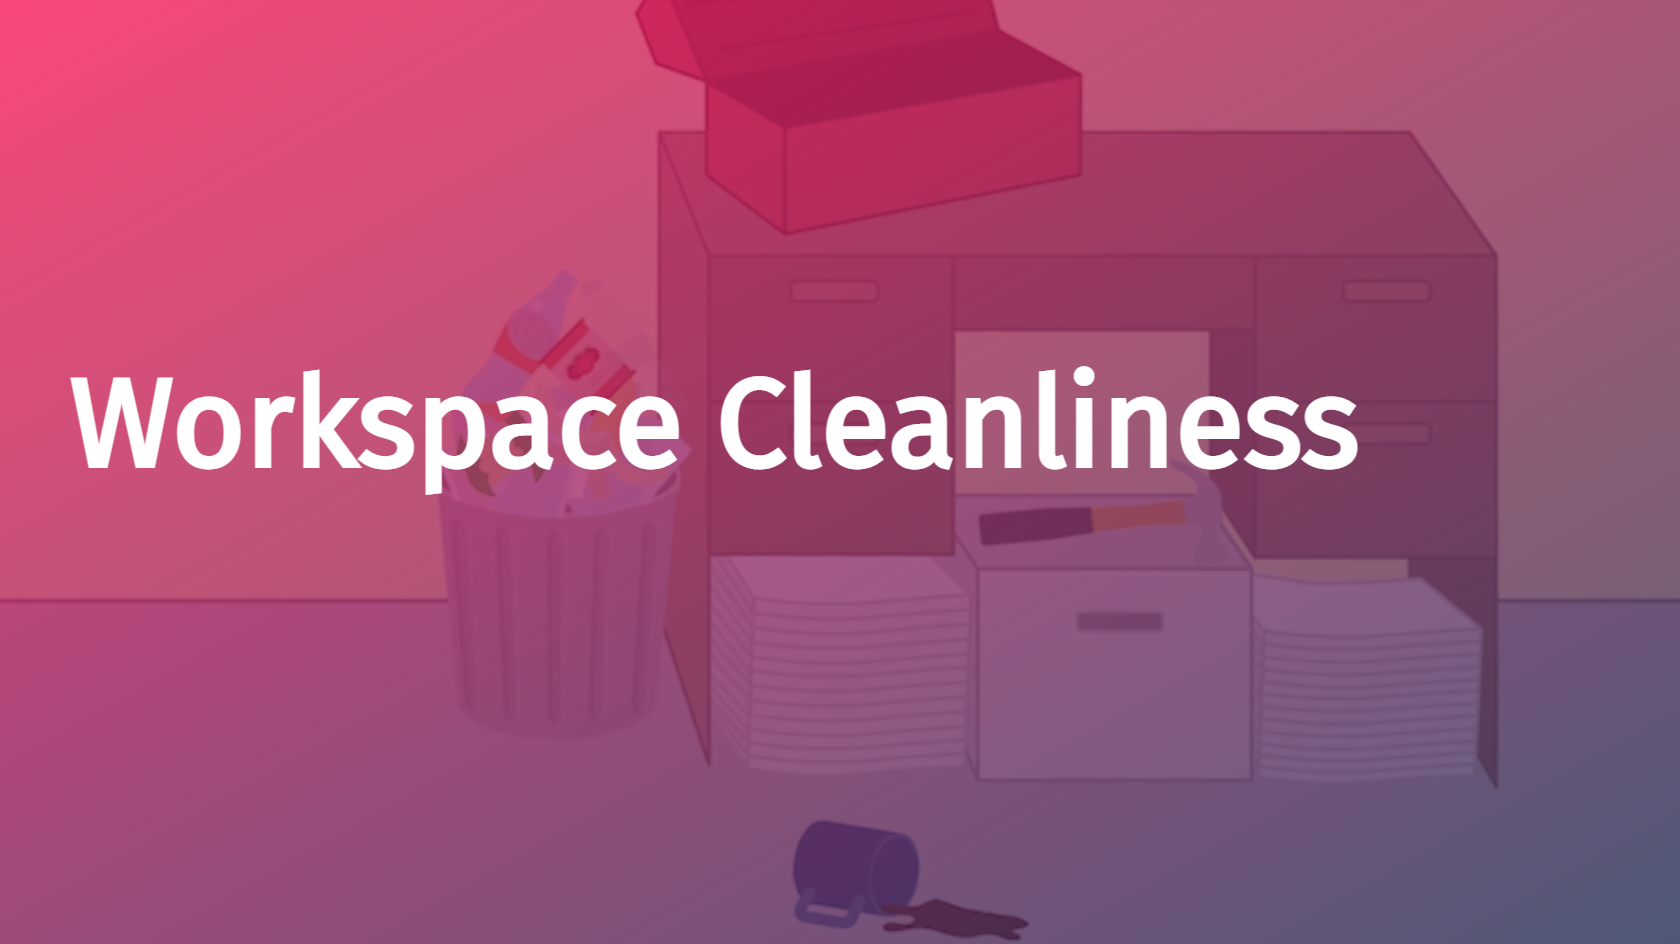 Workspace Cleanliness